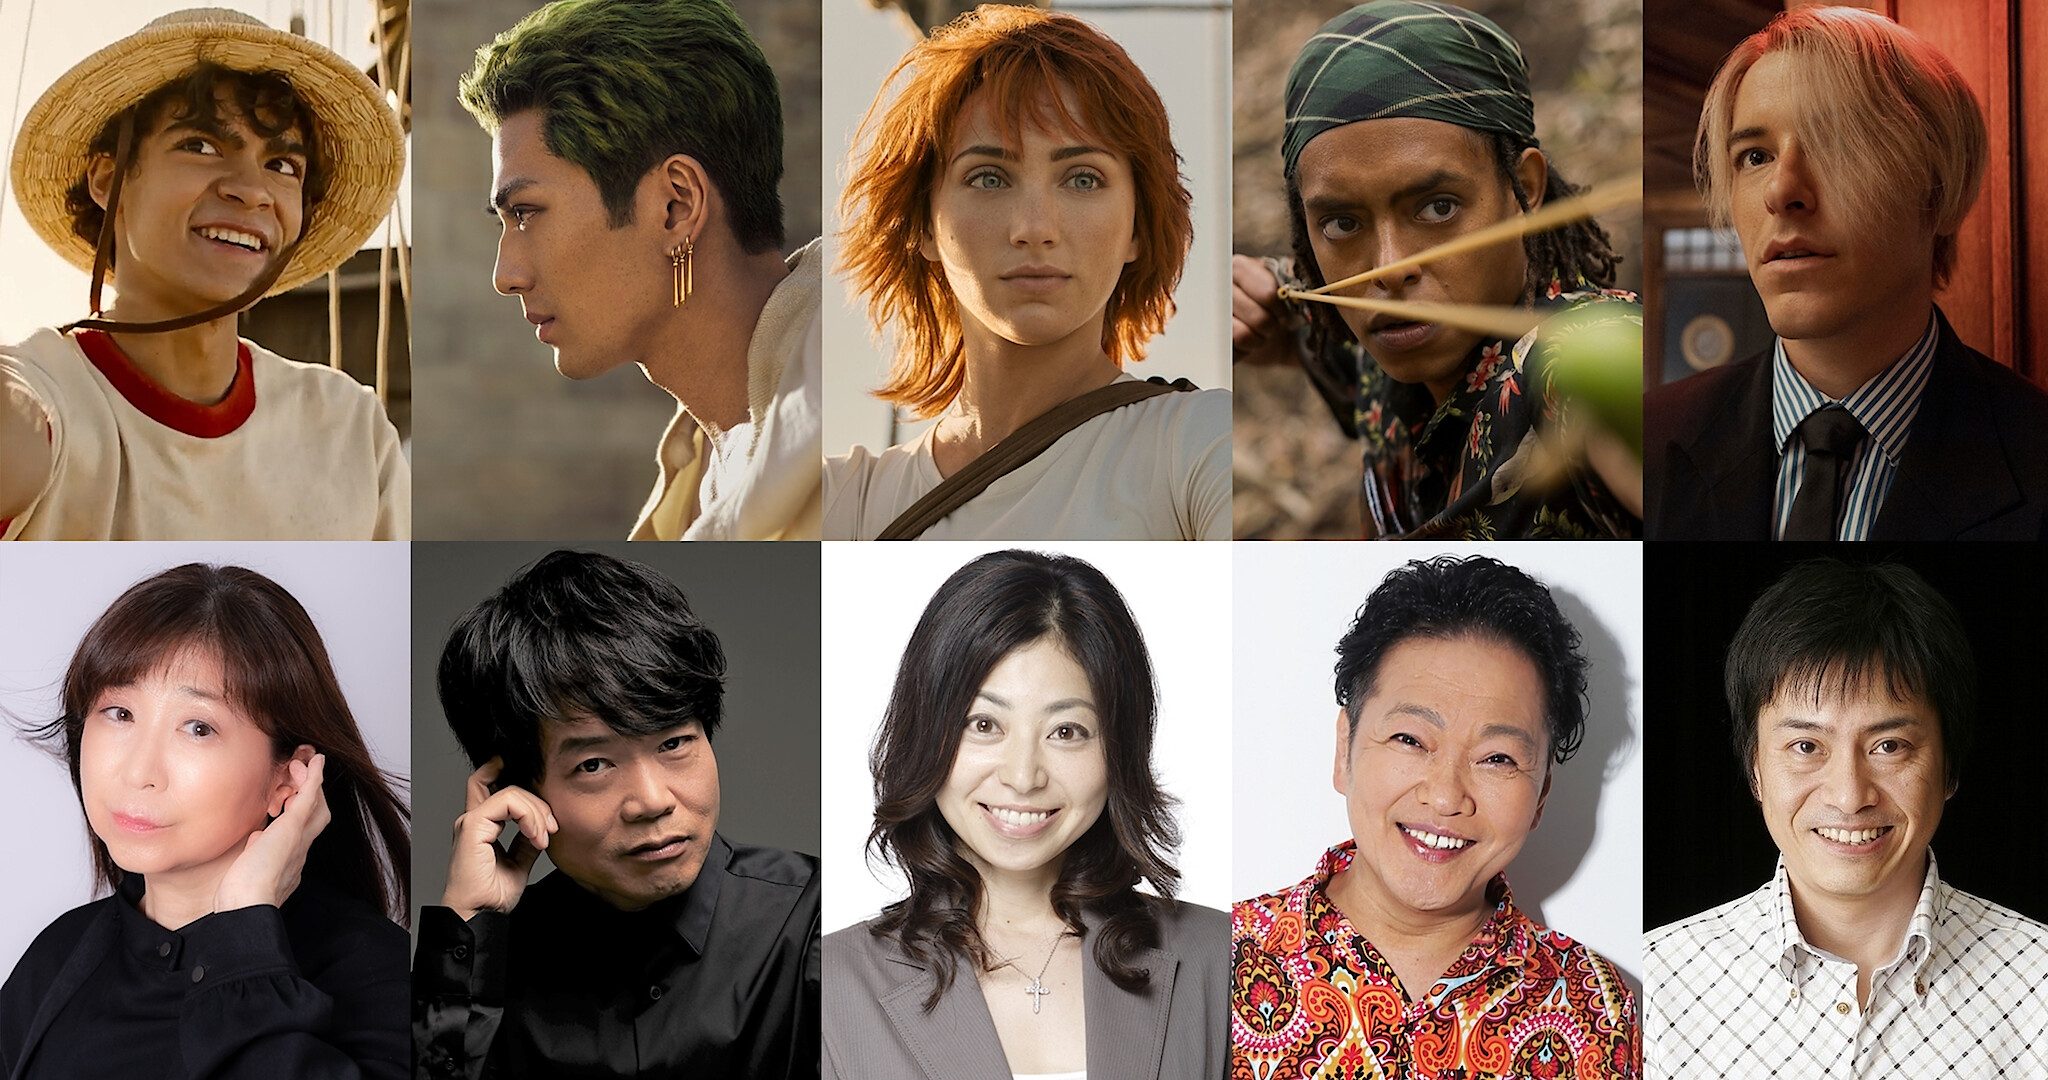 Adapting Anime: Finding The Next Live-Action Hit